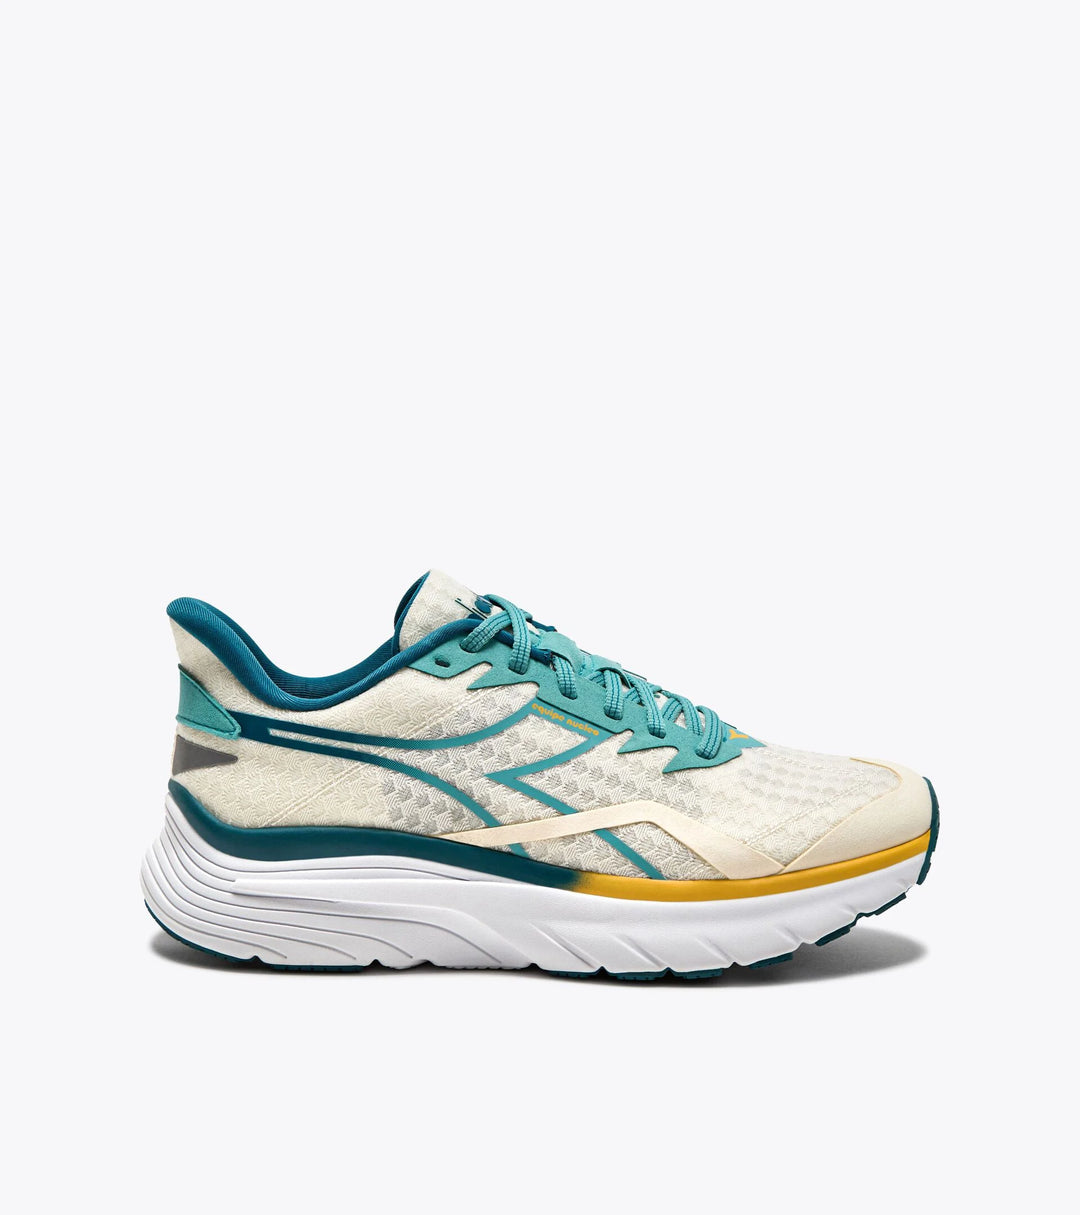 Diadora Women's Equipe Nucleo Whisper Dusty Turquoise - Orleans Shoe Co.